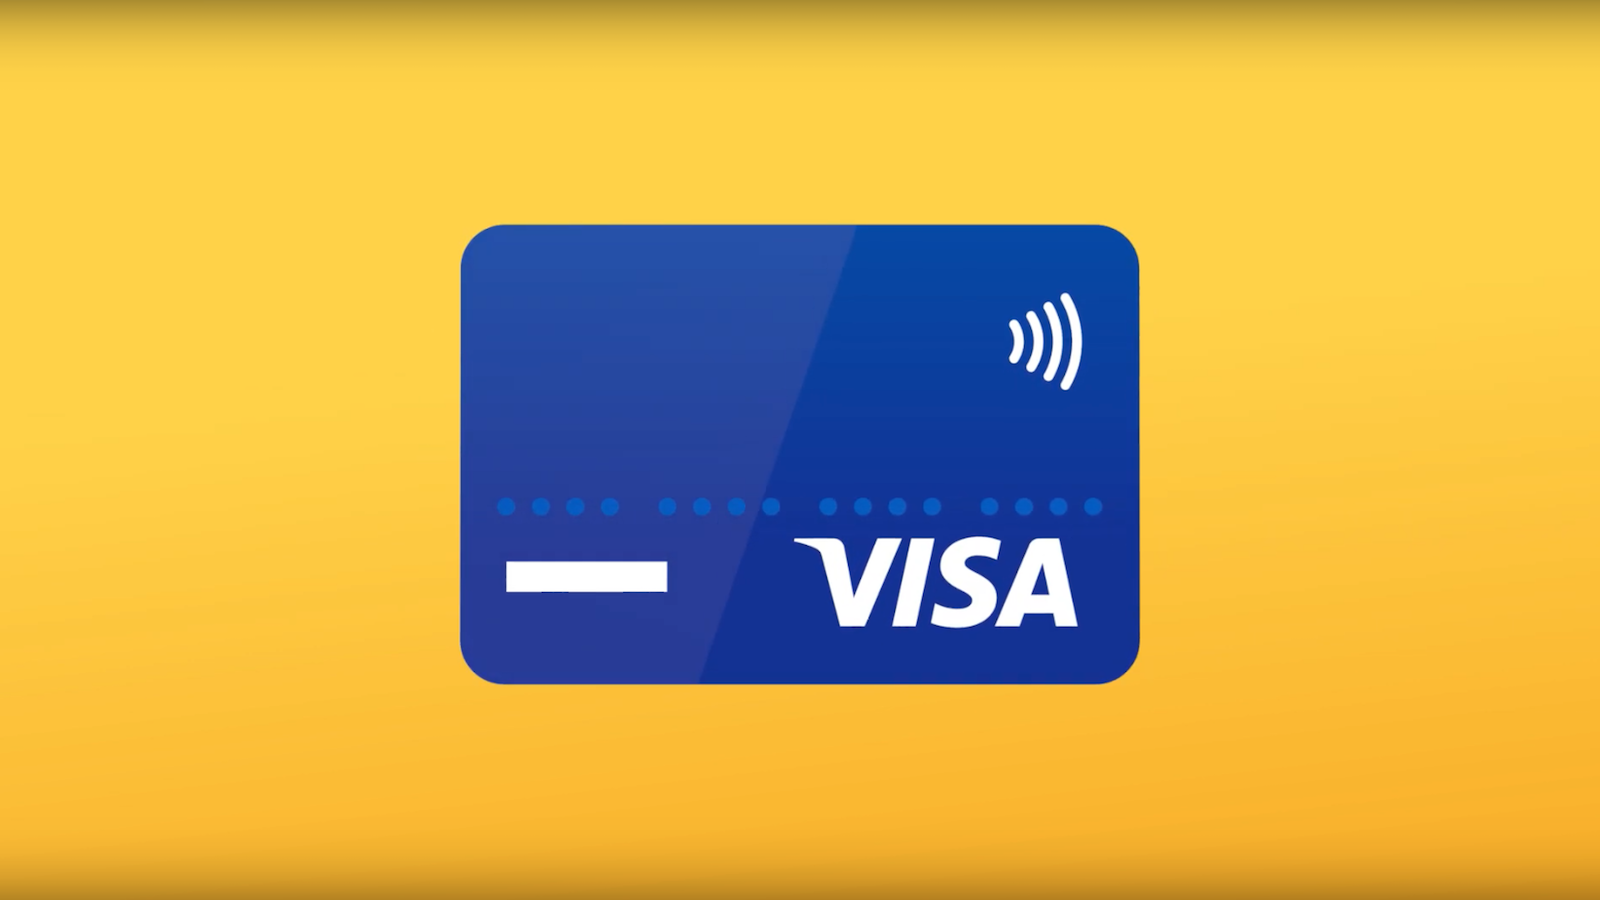 Blue Visa card against a yellow background.